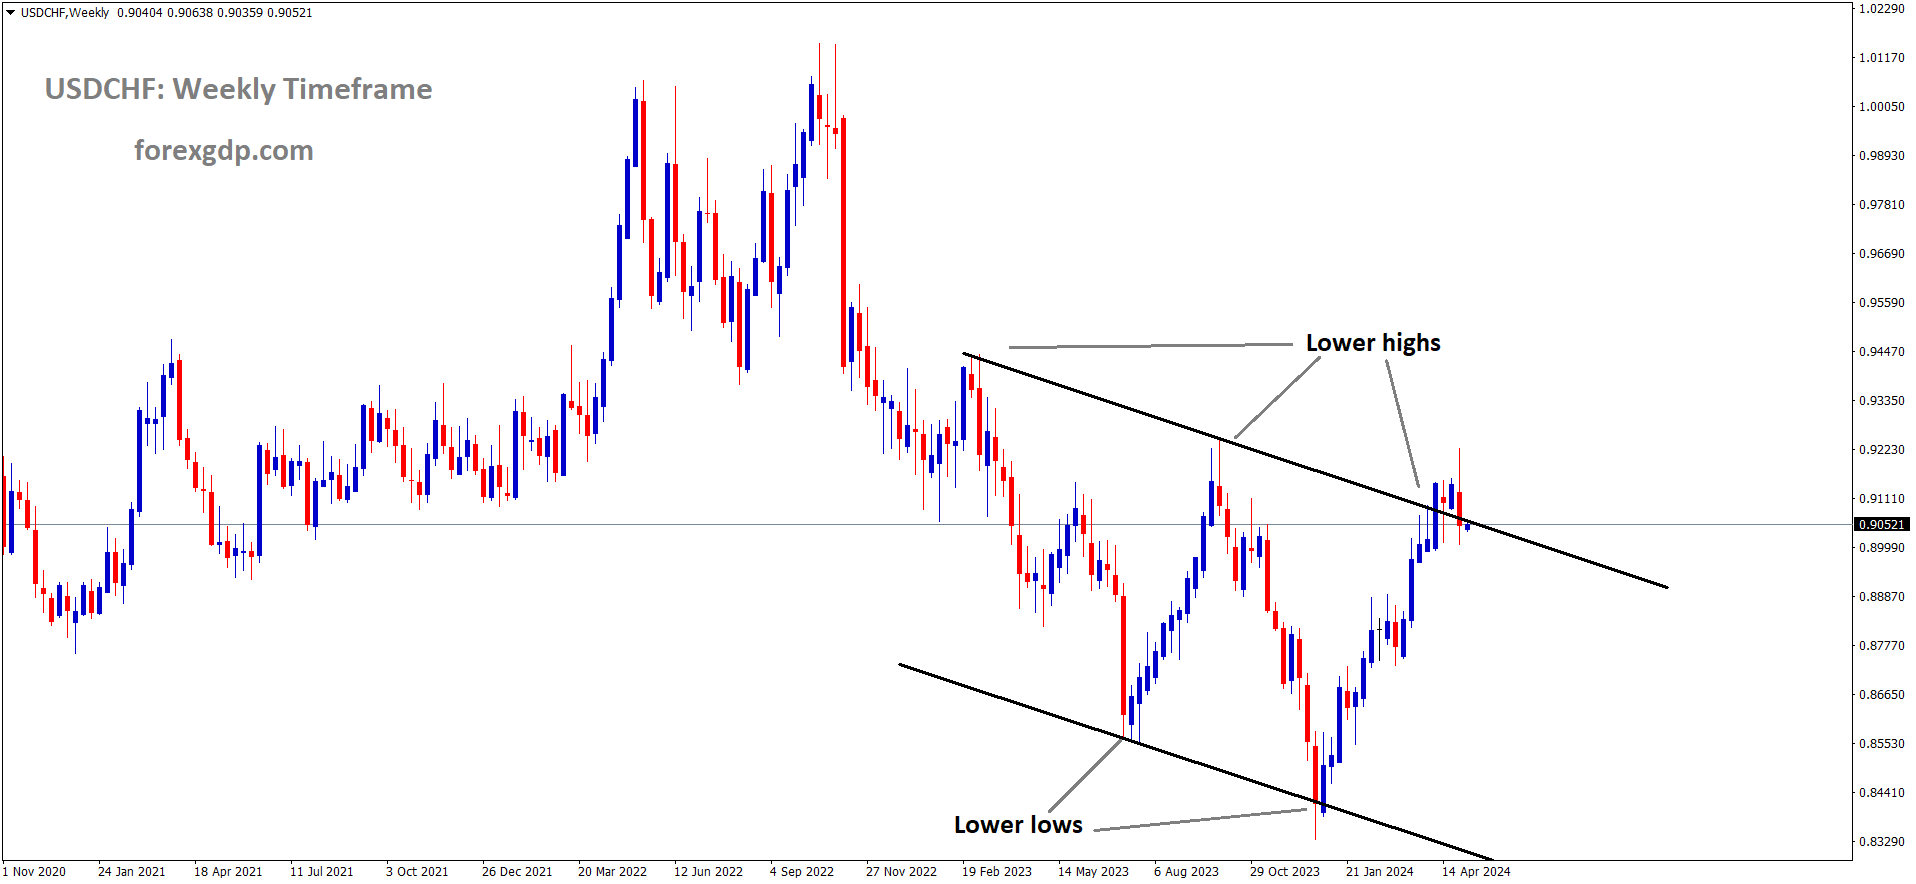 USDCHF is moving in Descending channel and market has reached lower high area of the channel